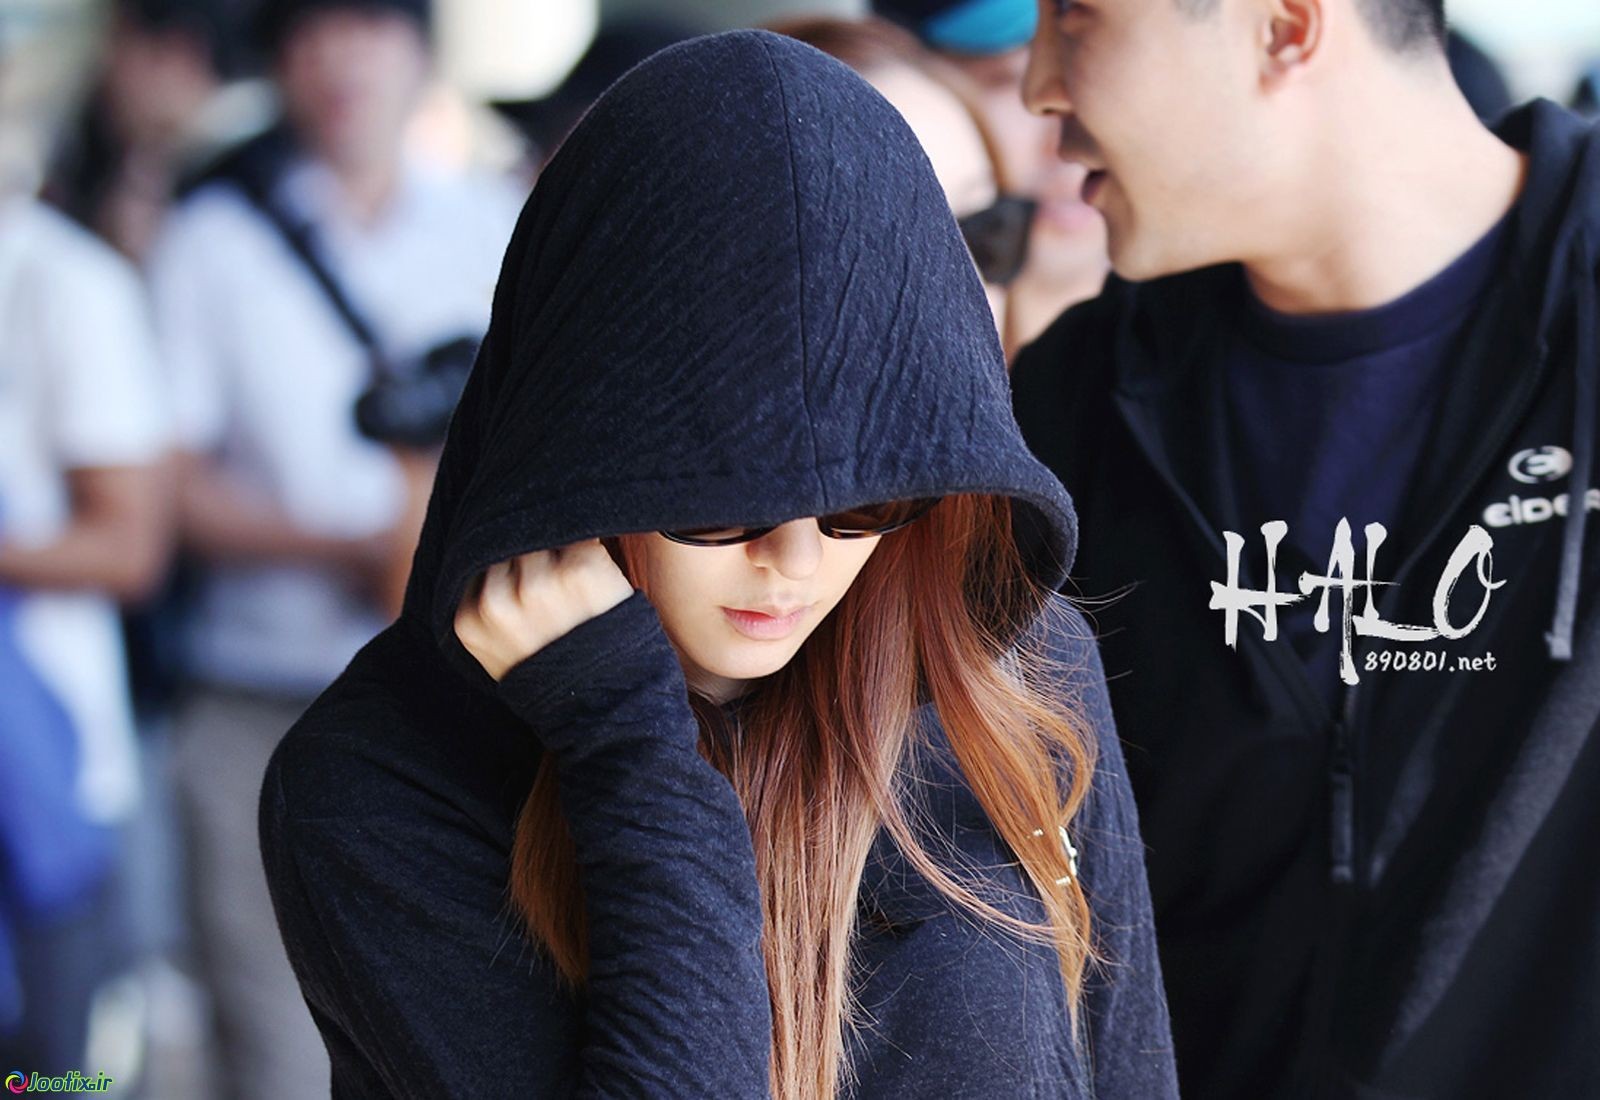 Hoods Covered Face Redhead Women With Shades Celebrity People 1600x1100